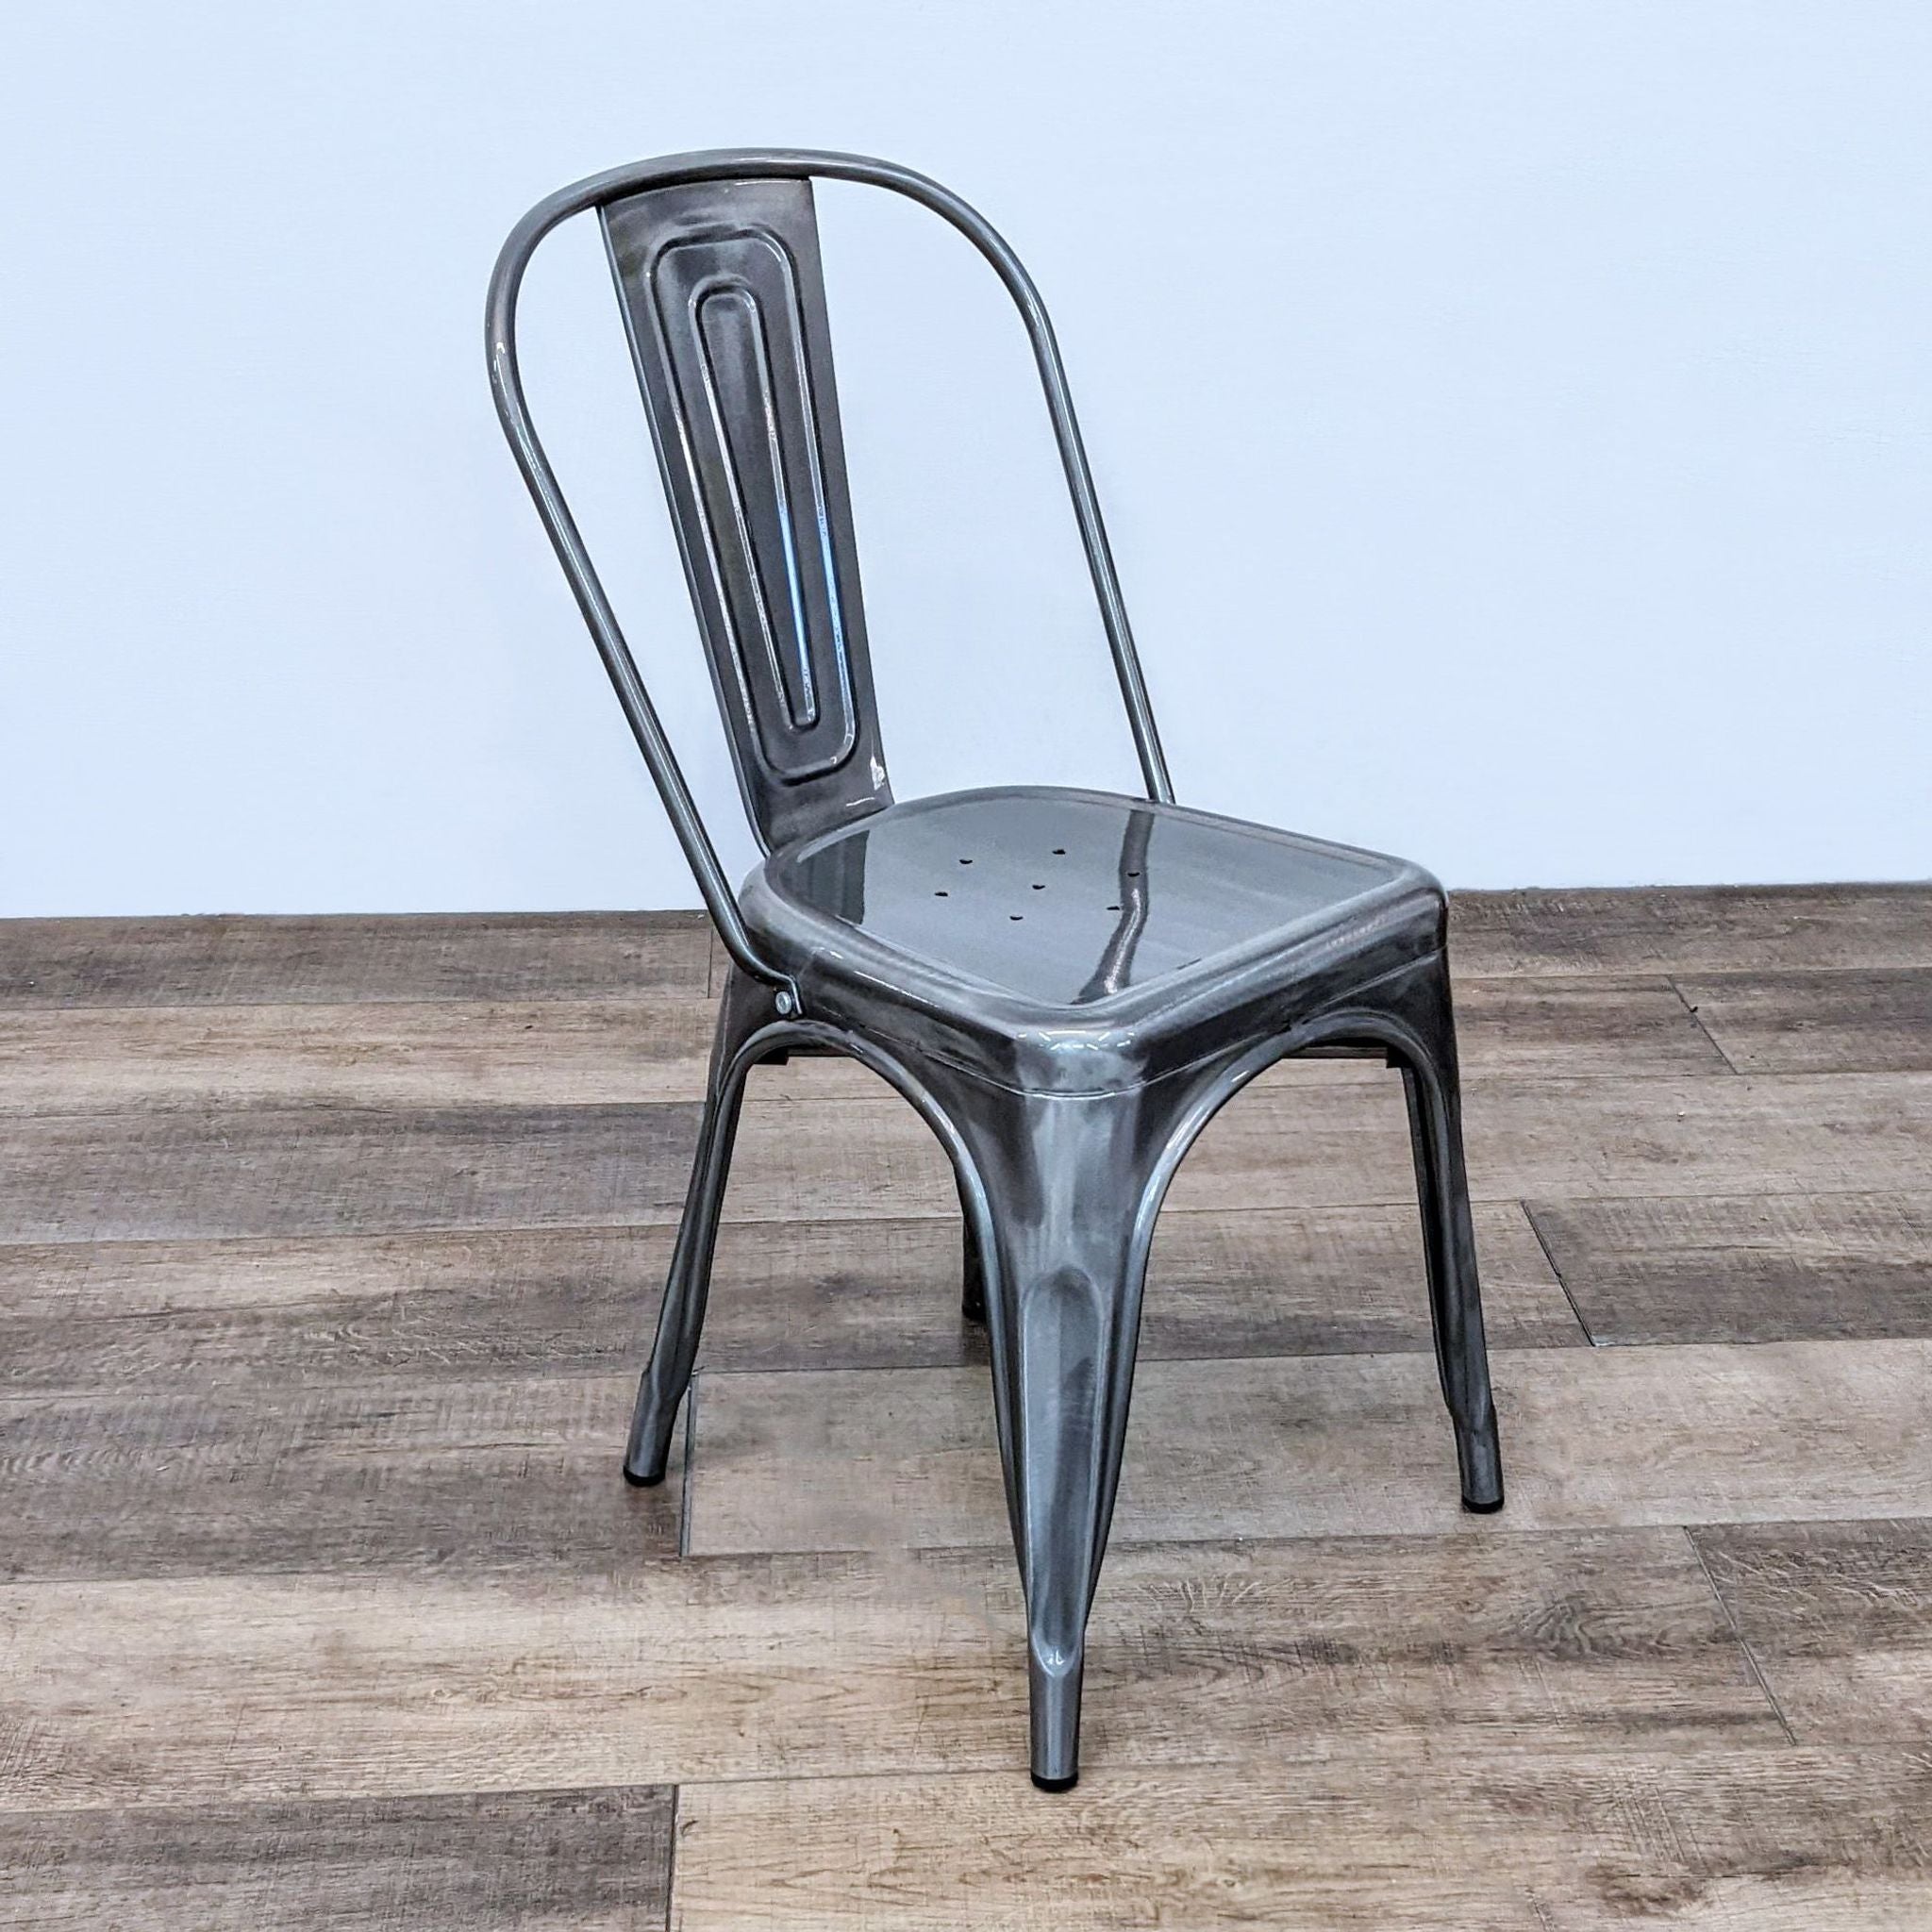 Reperch brand industrial metal side chair with a curved back and tapered legs suitable for indoor or outdoor seating.